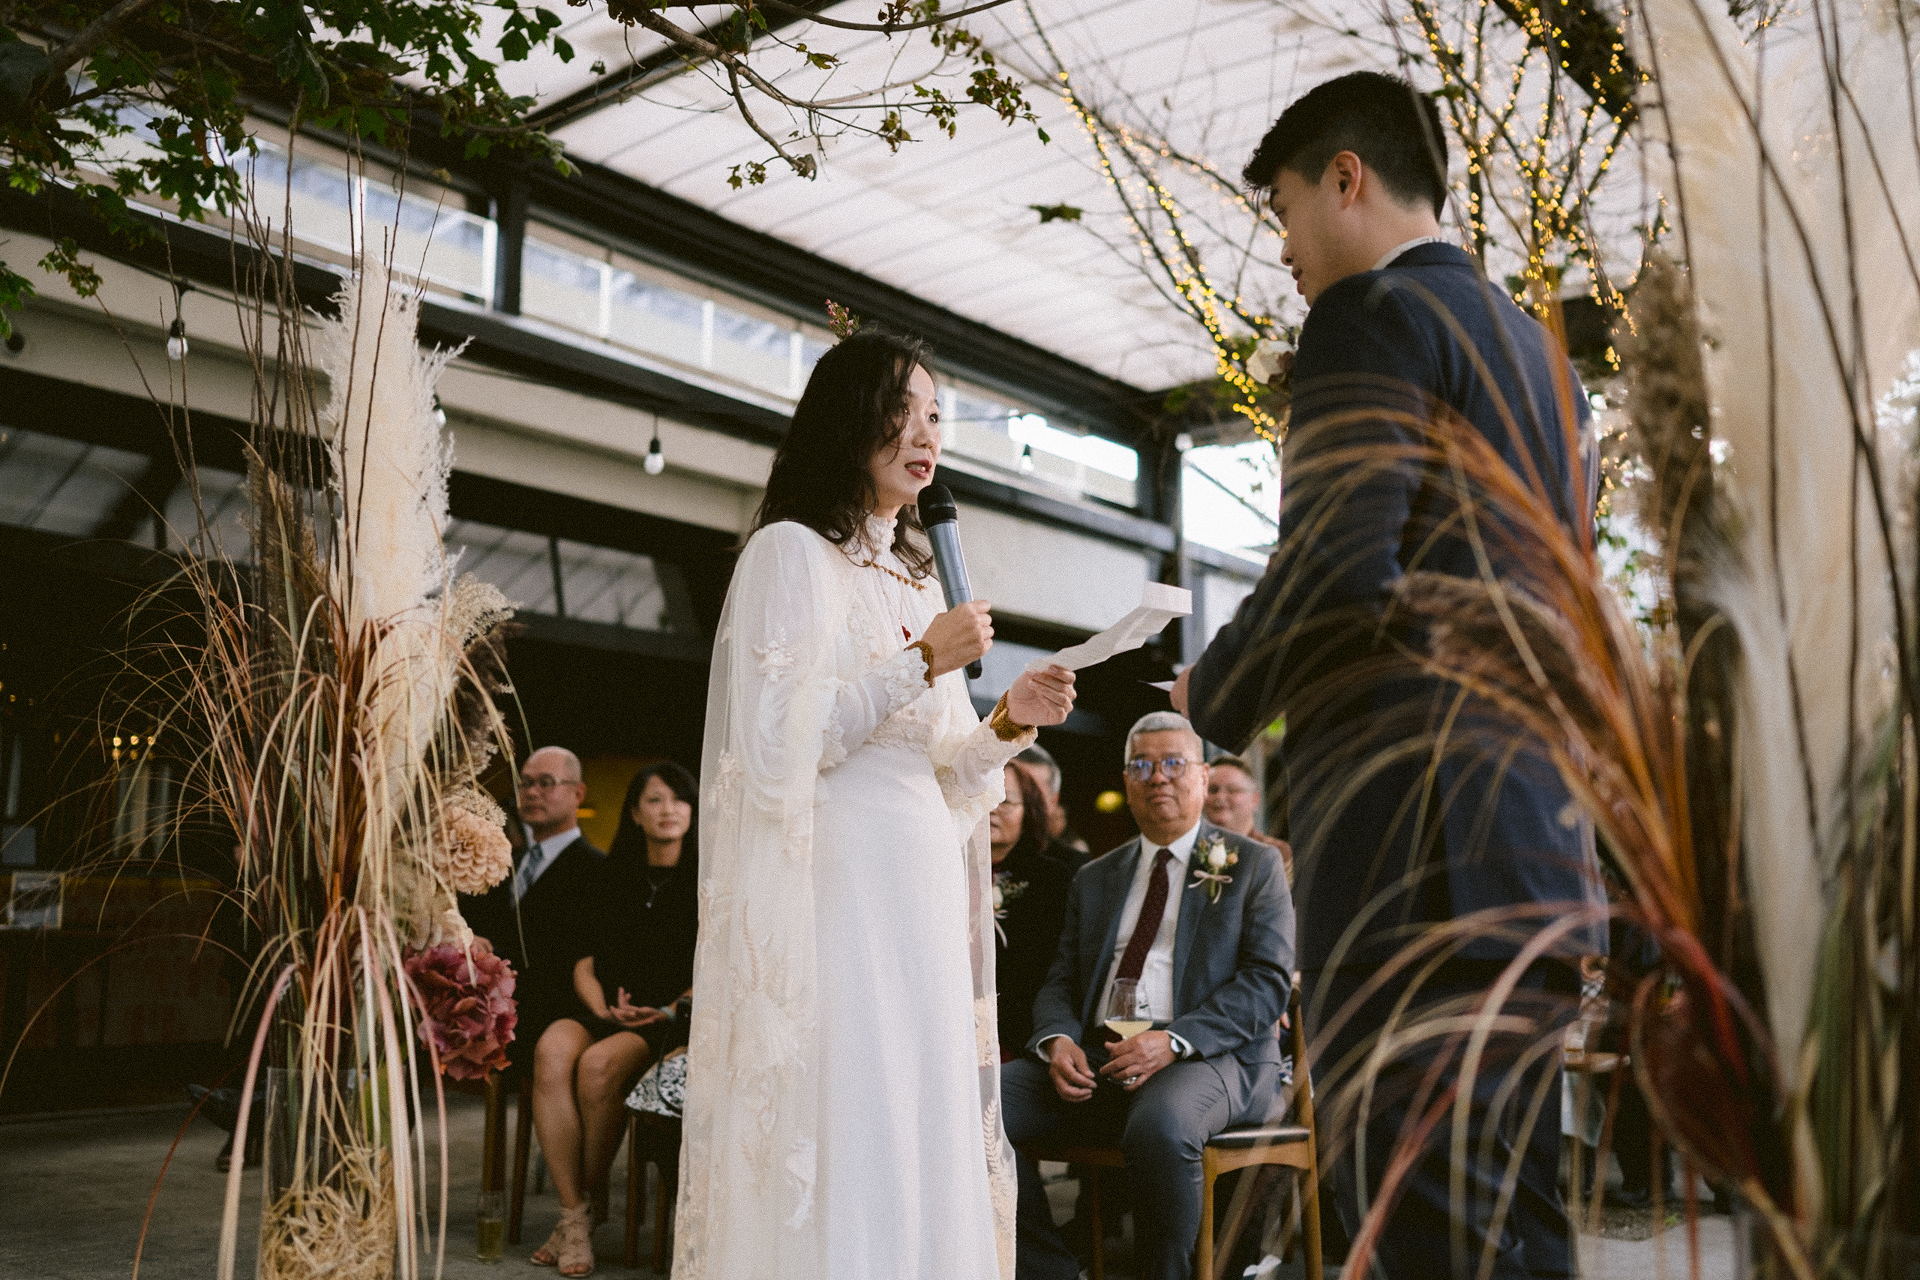 A bride reads her vows to the groom during an indoor wedding ceremony surrounded by guests and decorative foliage.